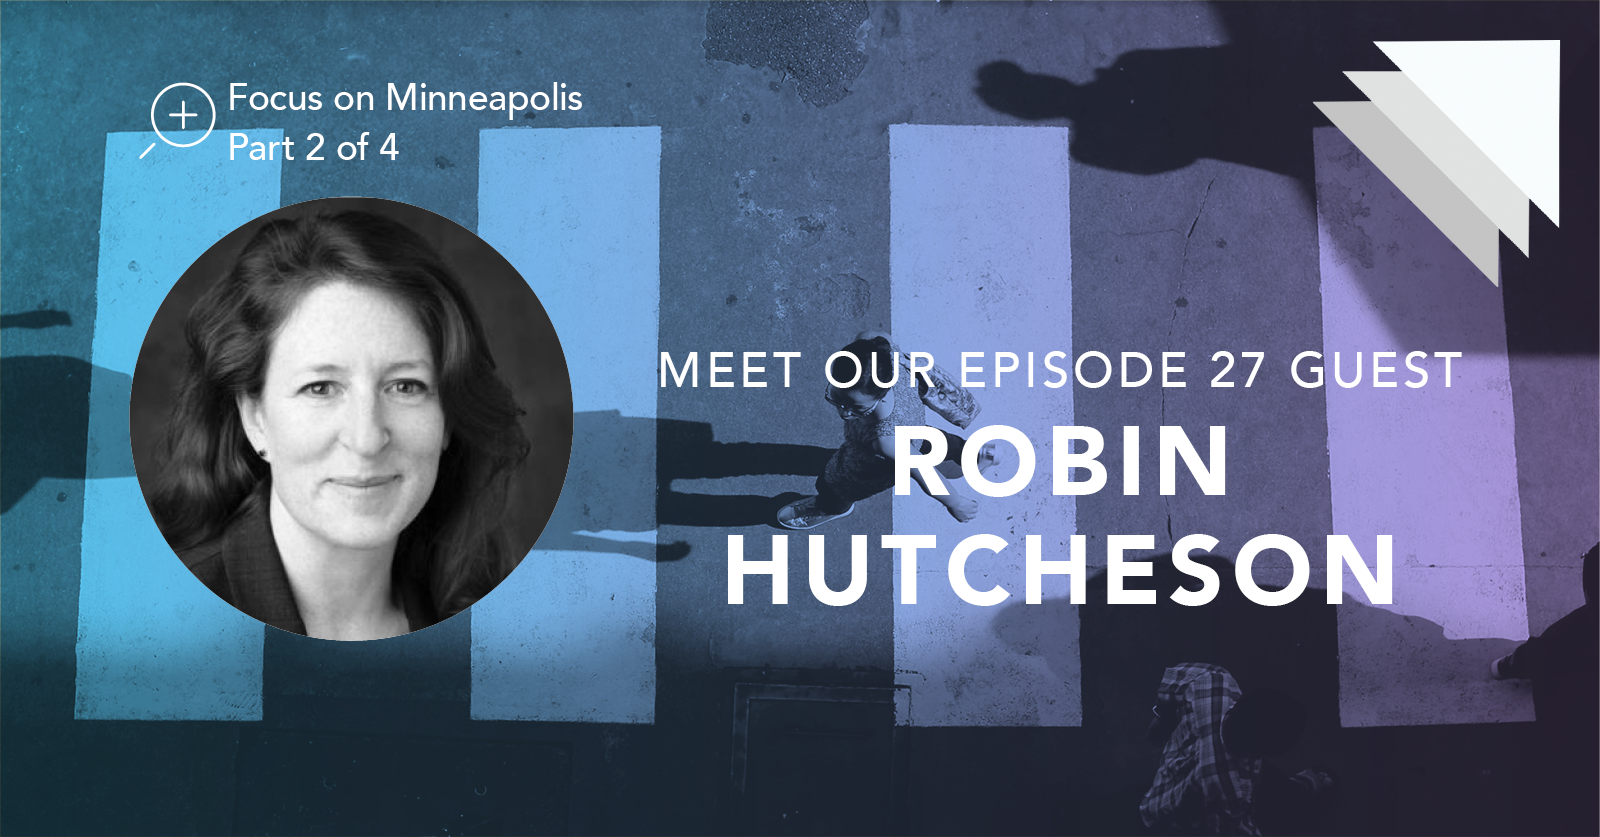 Meet our episode 27 guest Robin Hutcheson